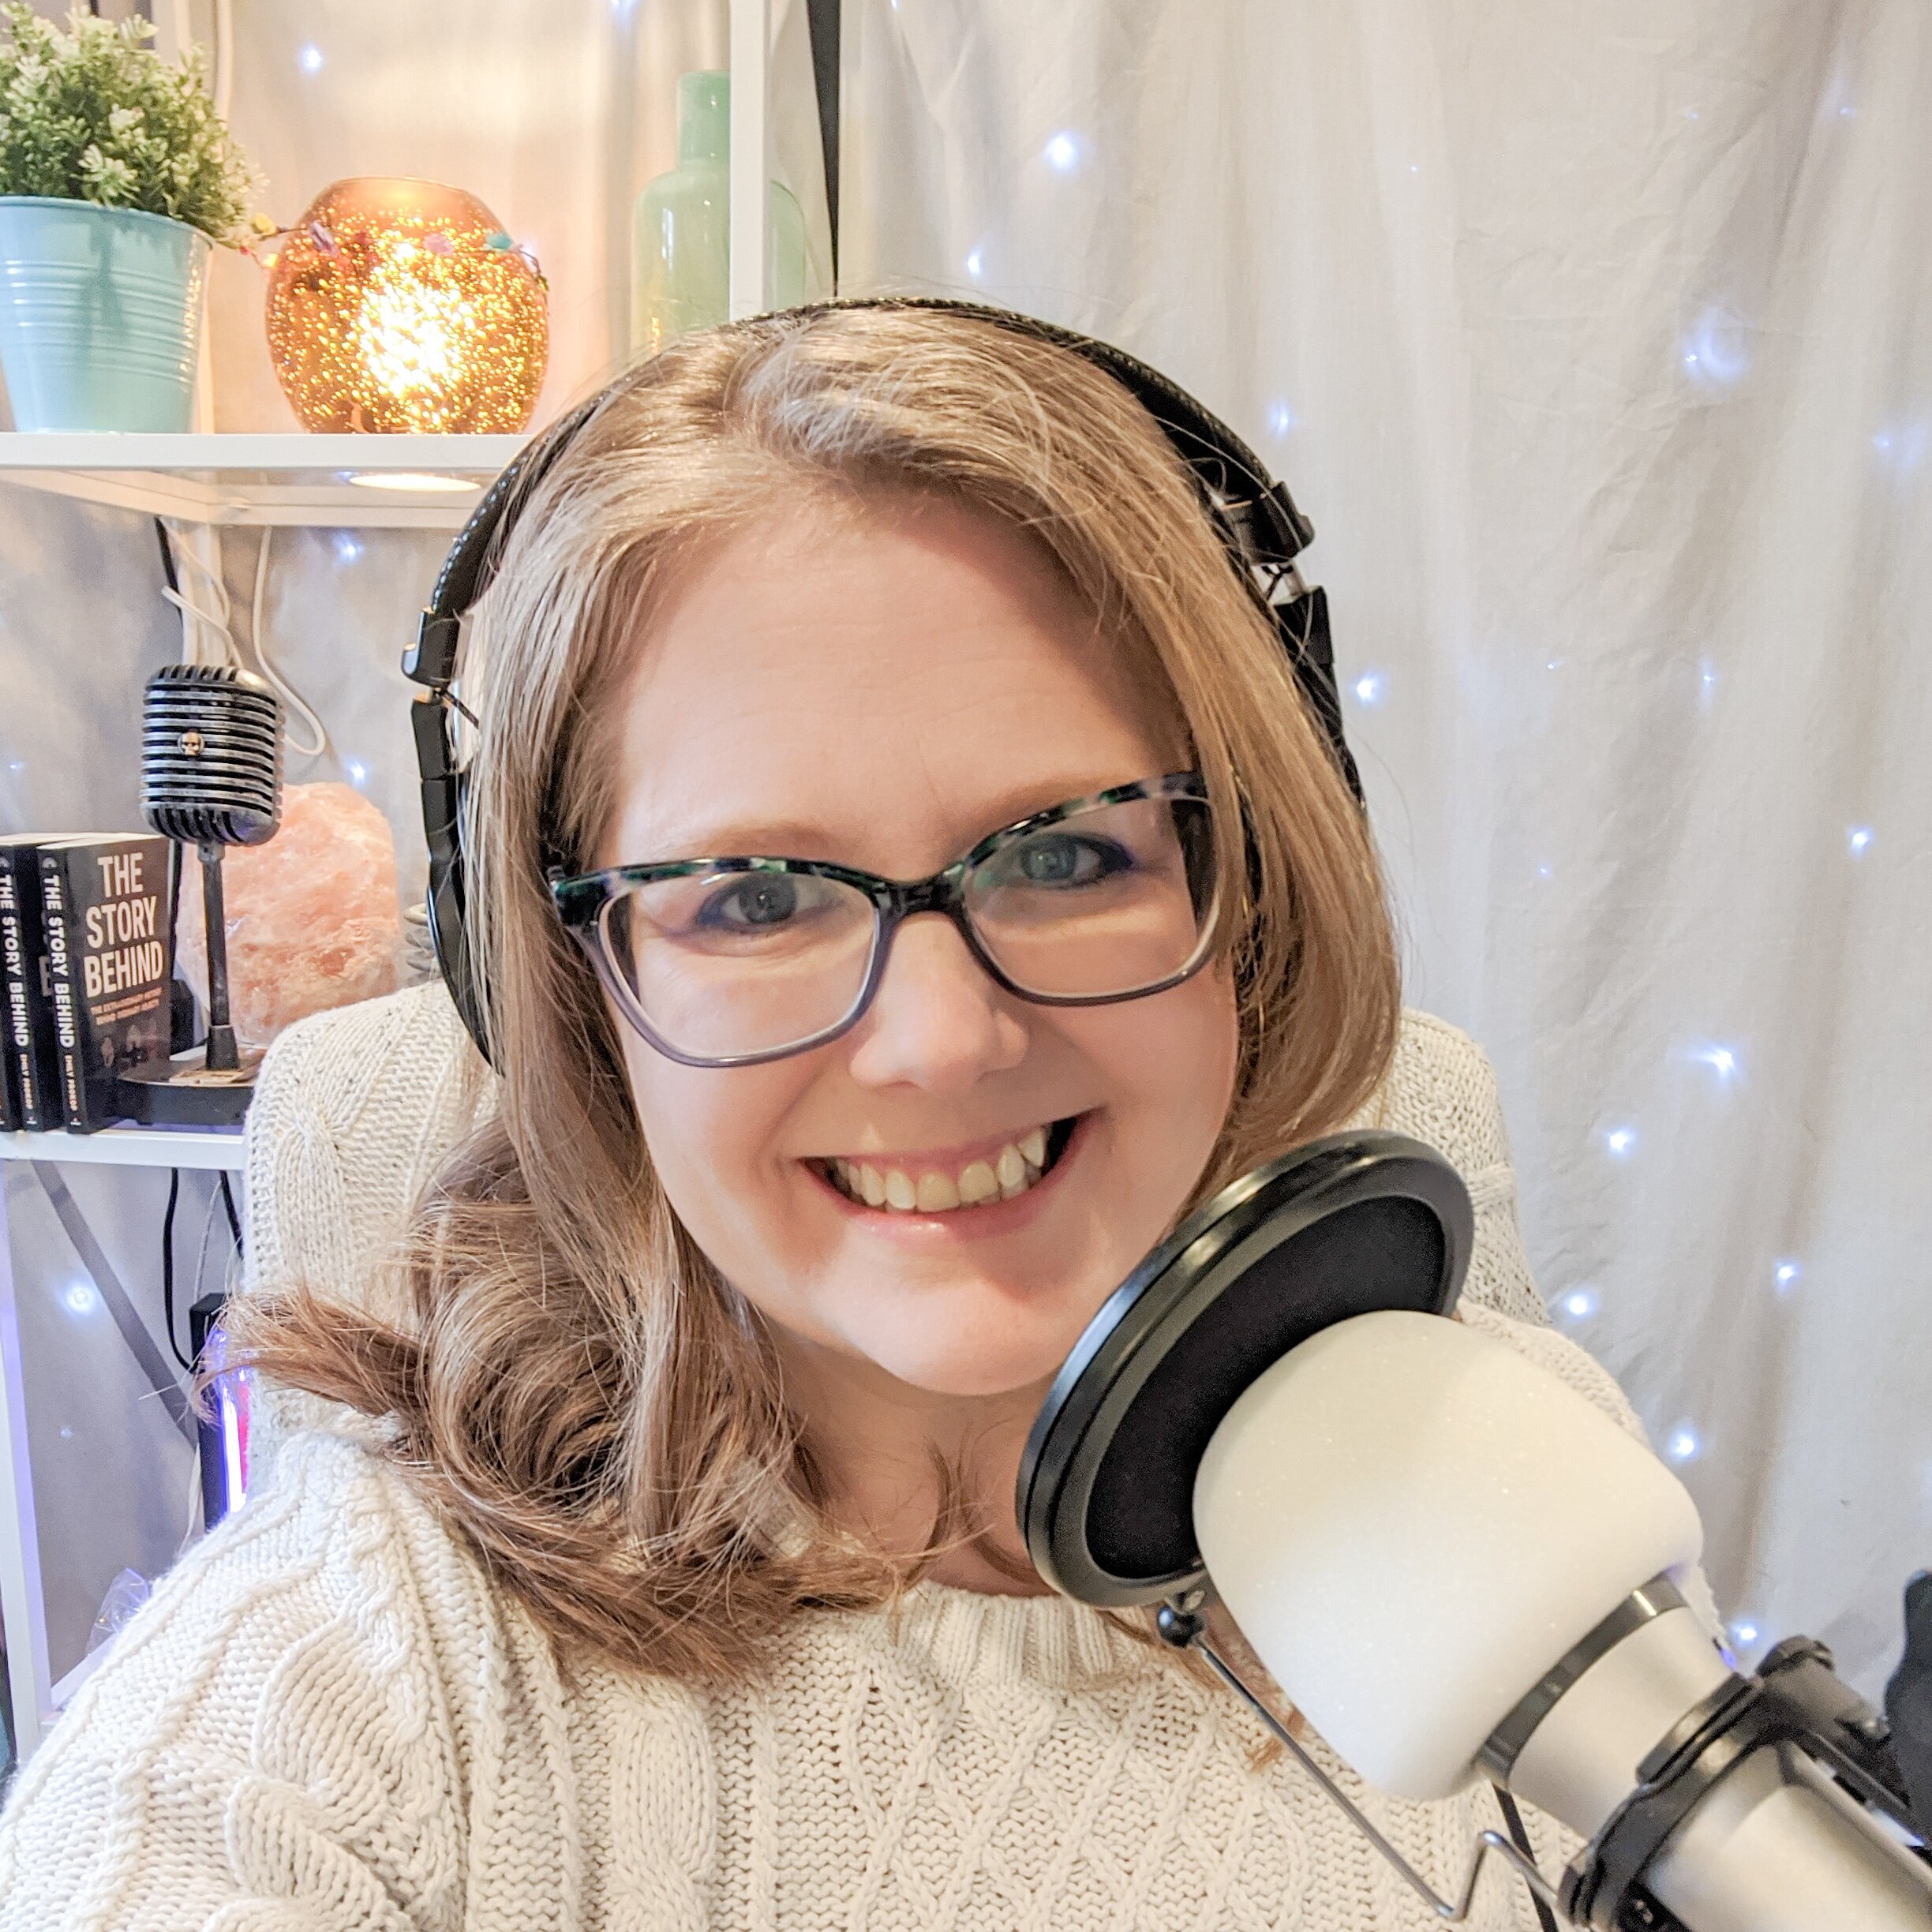 ADHD Podcast Editor-Approved!: Honest Review about Loop Engage Plus  Earplugs — Emily Prokop